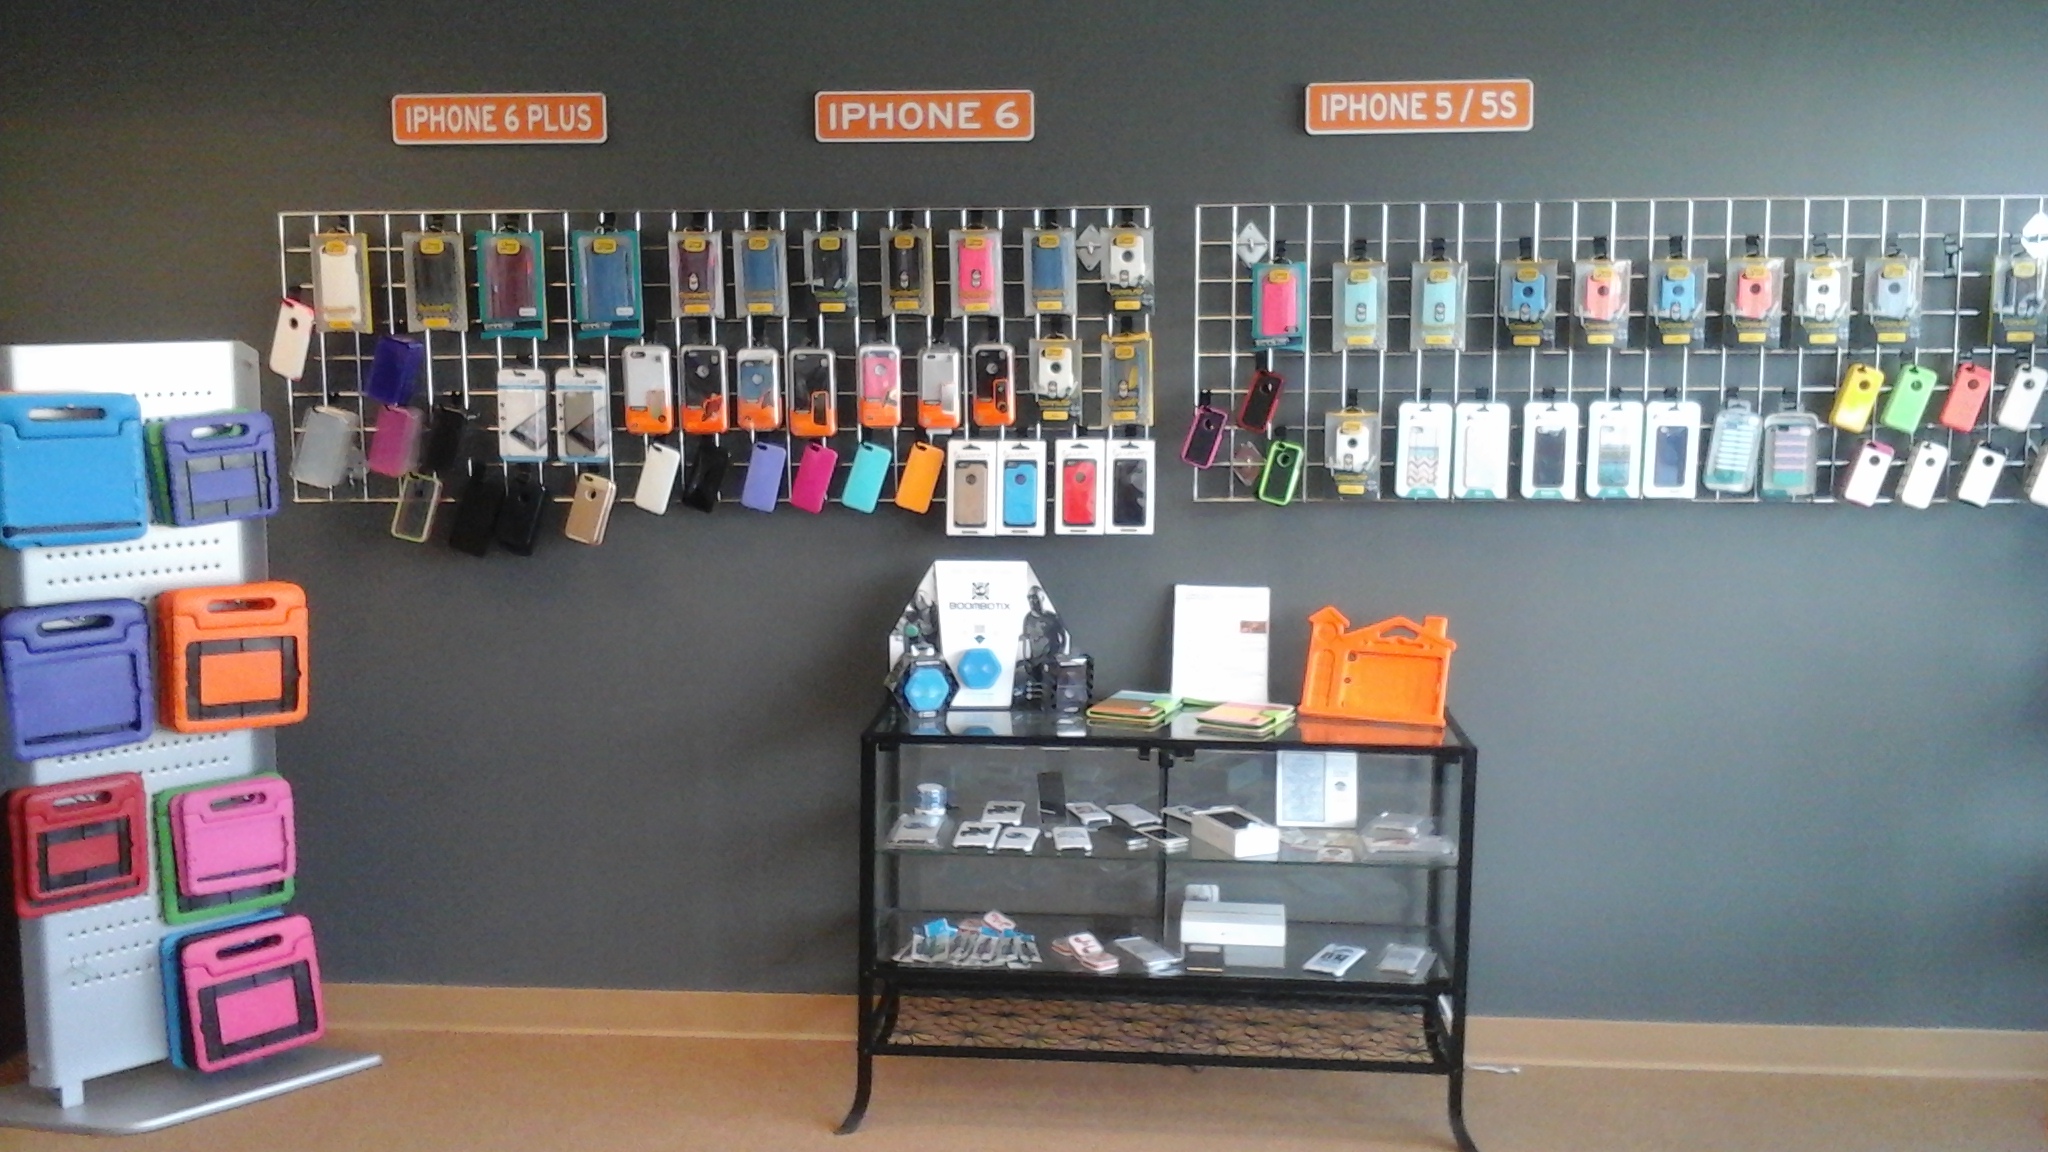 Choose from a great selection of accessories to protect your cell phone.